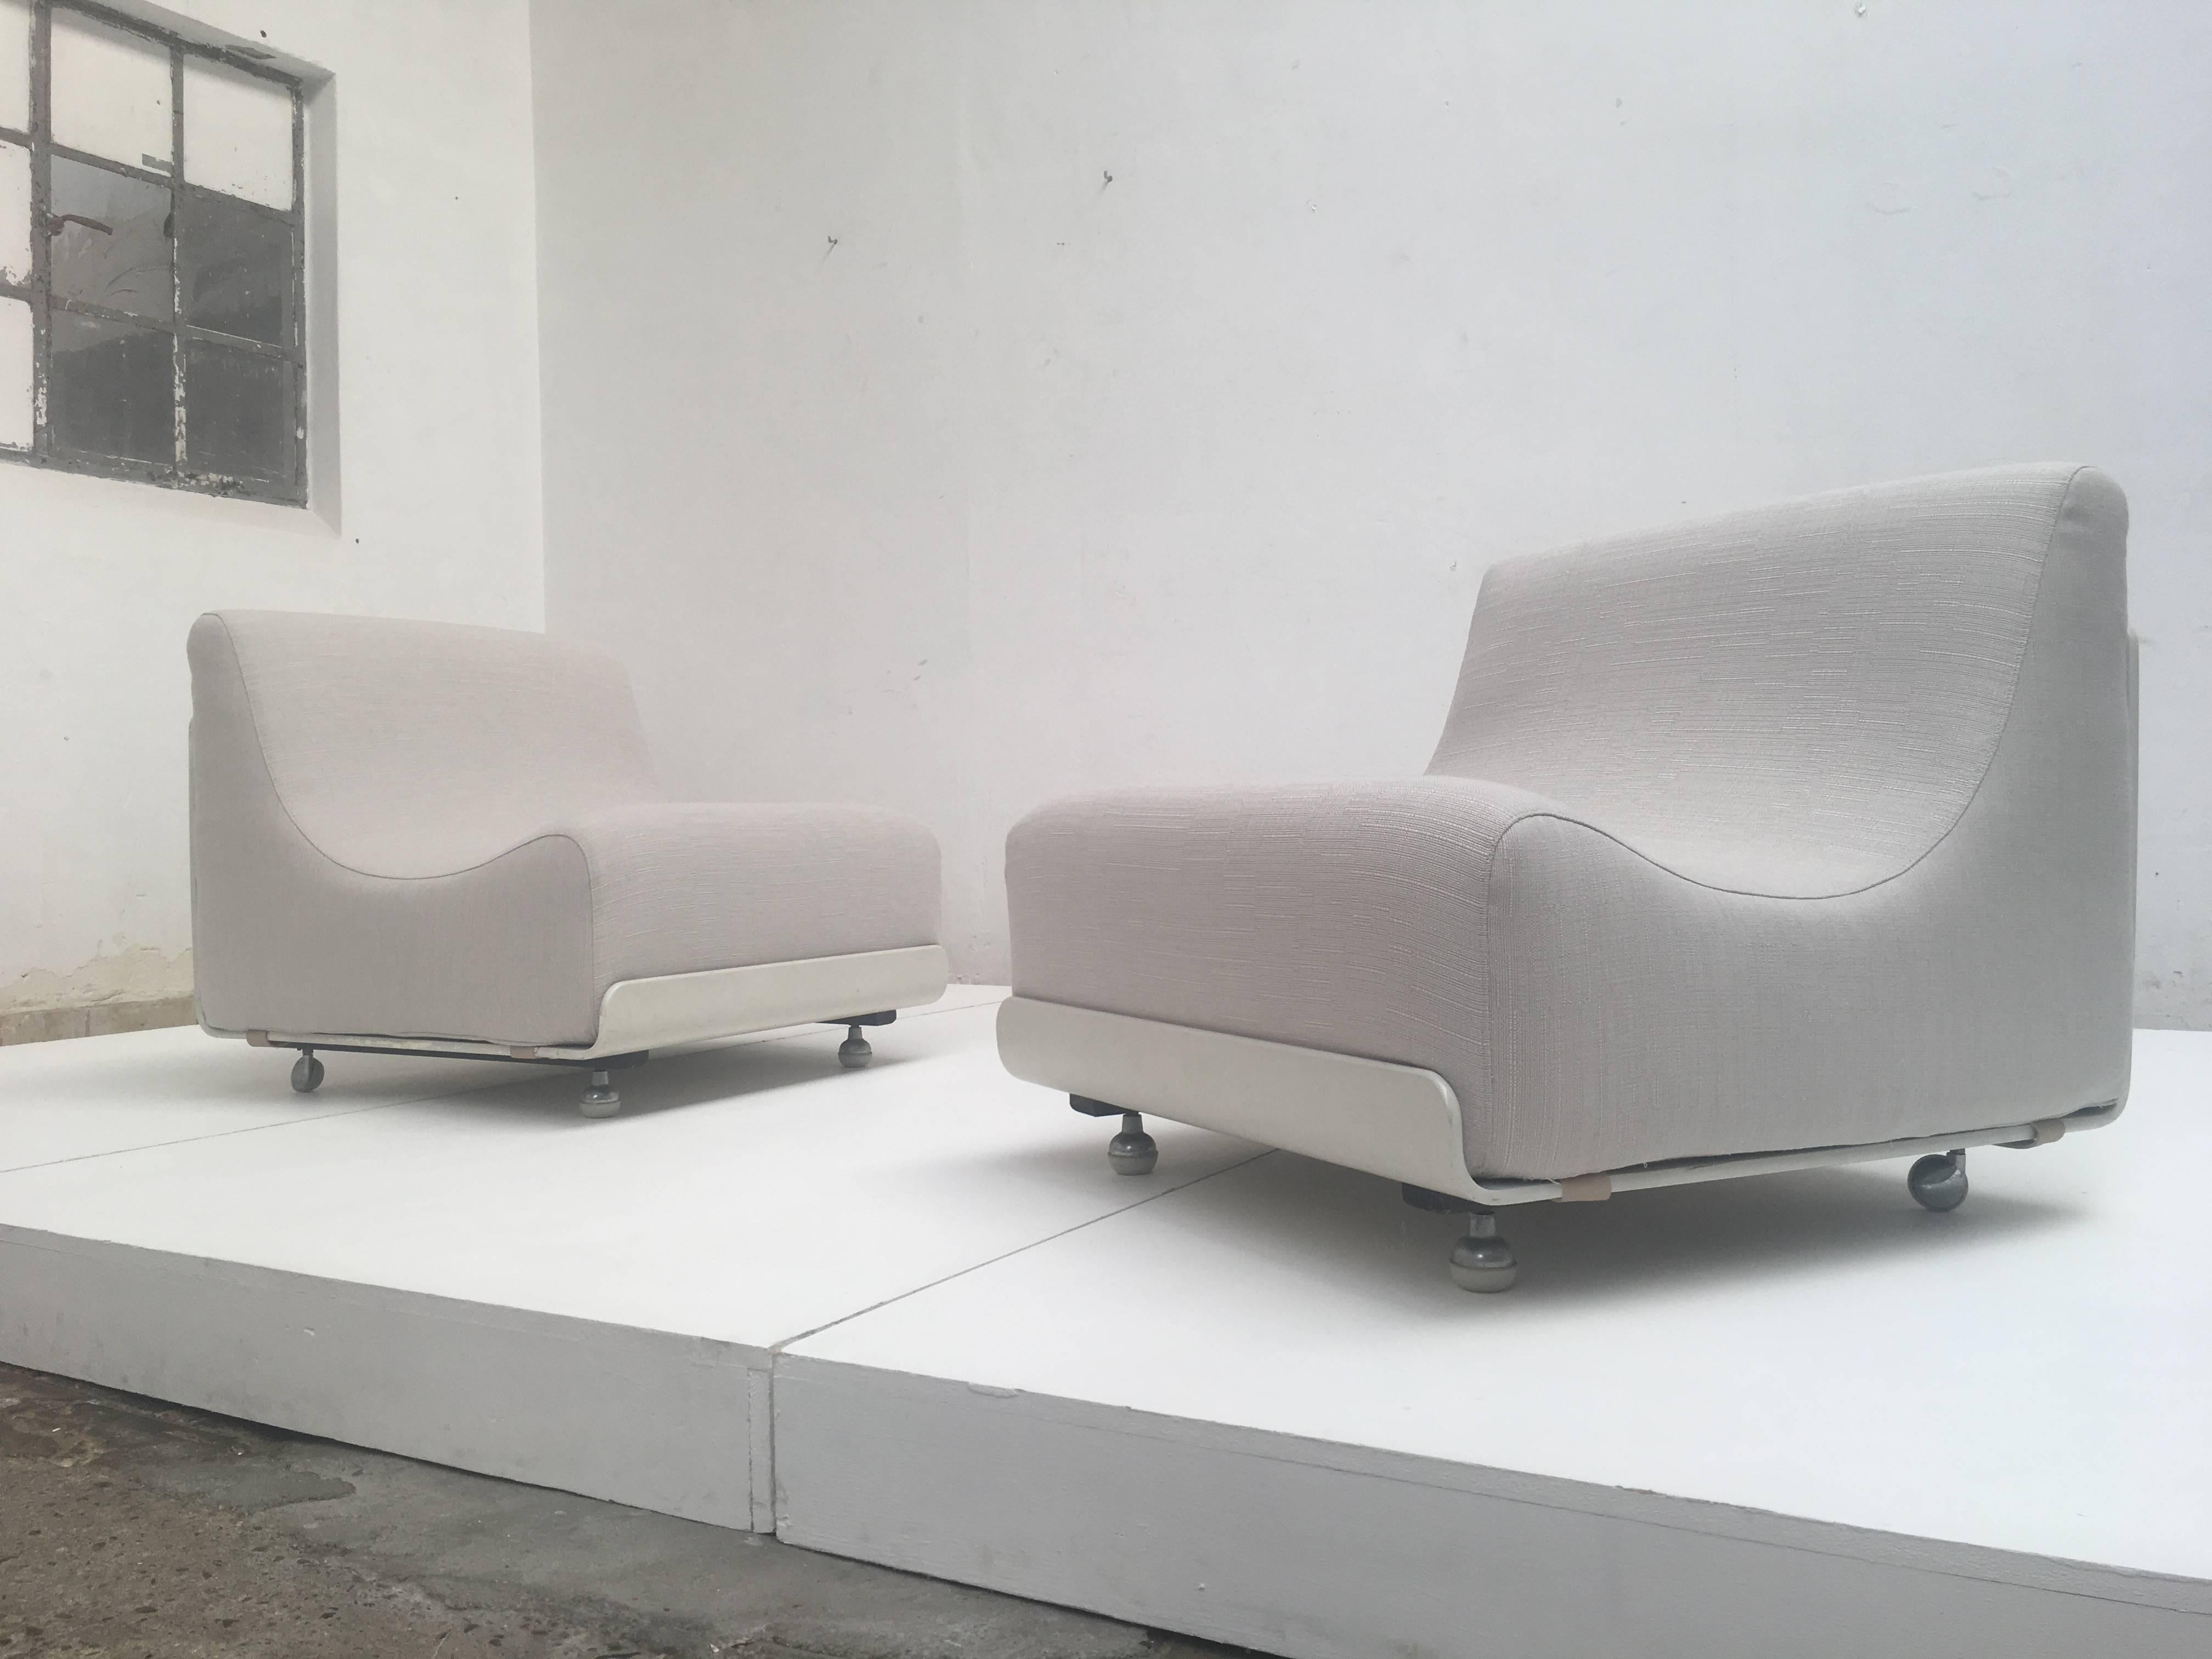 This pair of 'Orbis' Spage Age seating units was designed by flamboyant Industrial designer Luigi Colani for COR Germany in 1970

Each unit features a plywood white lacquered base with metal wheels on the backside for easy positioning

We have